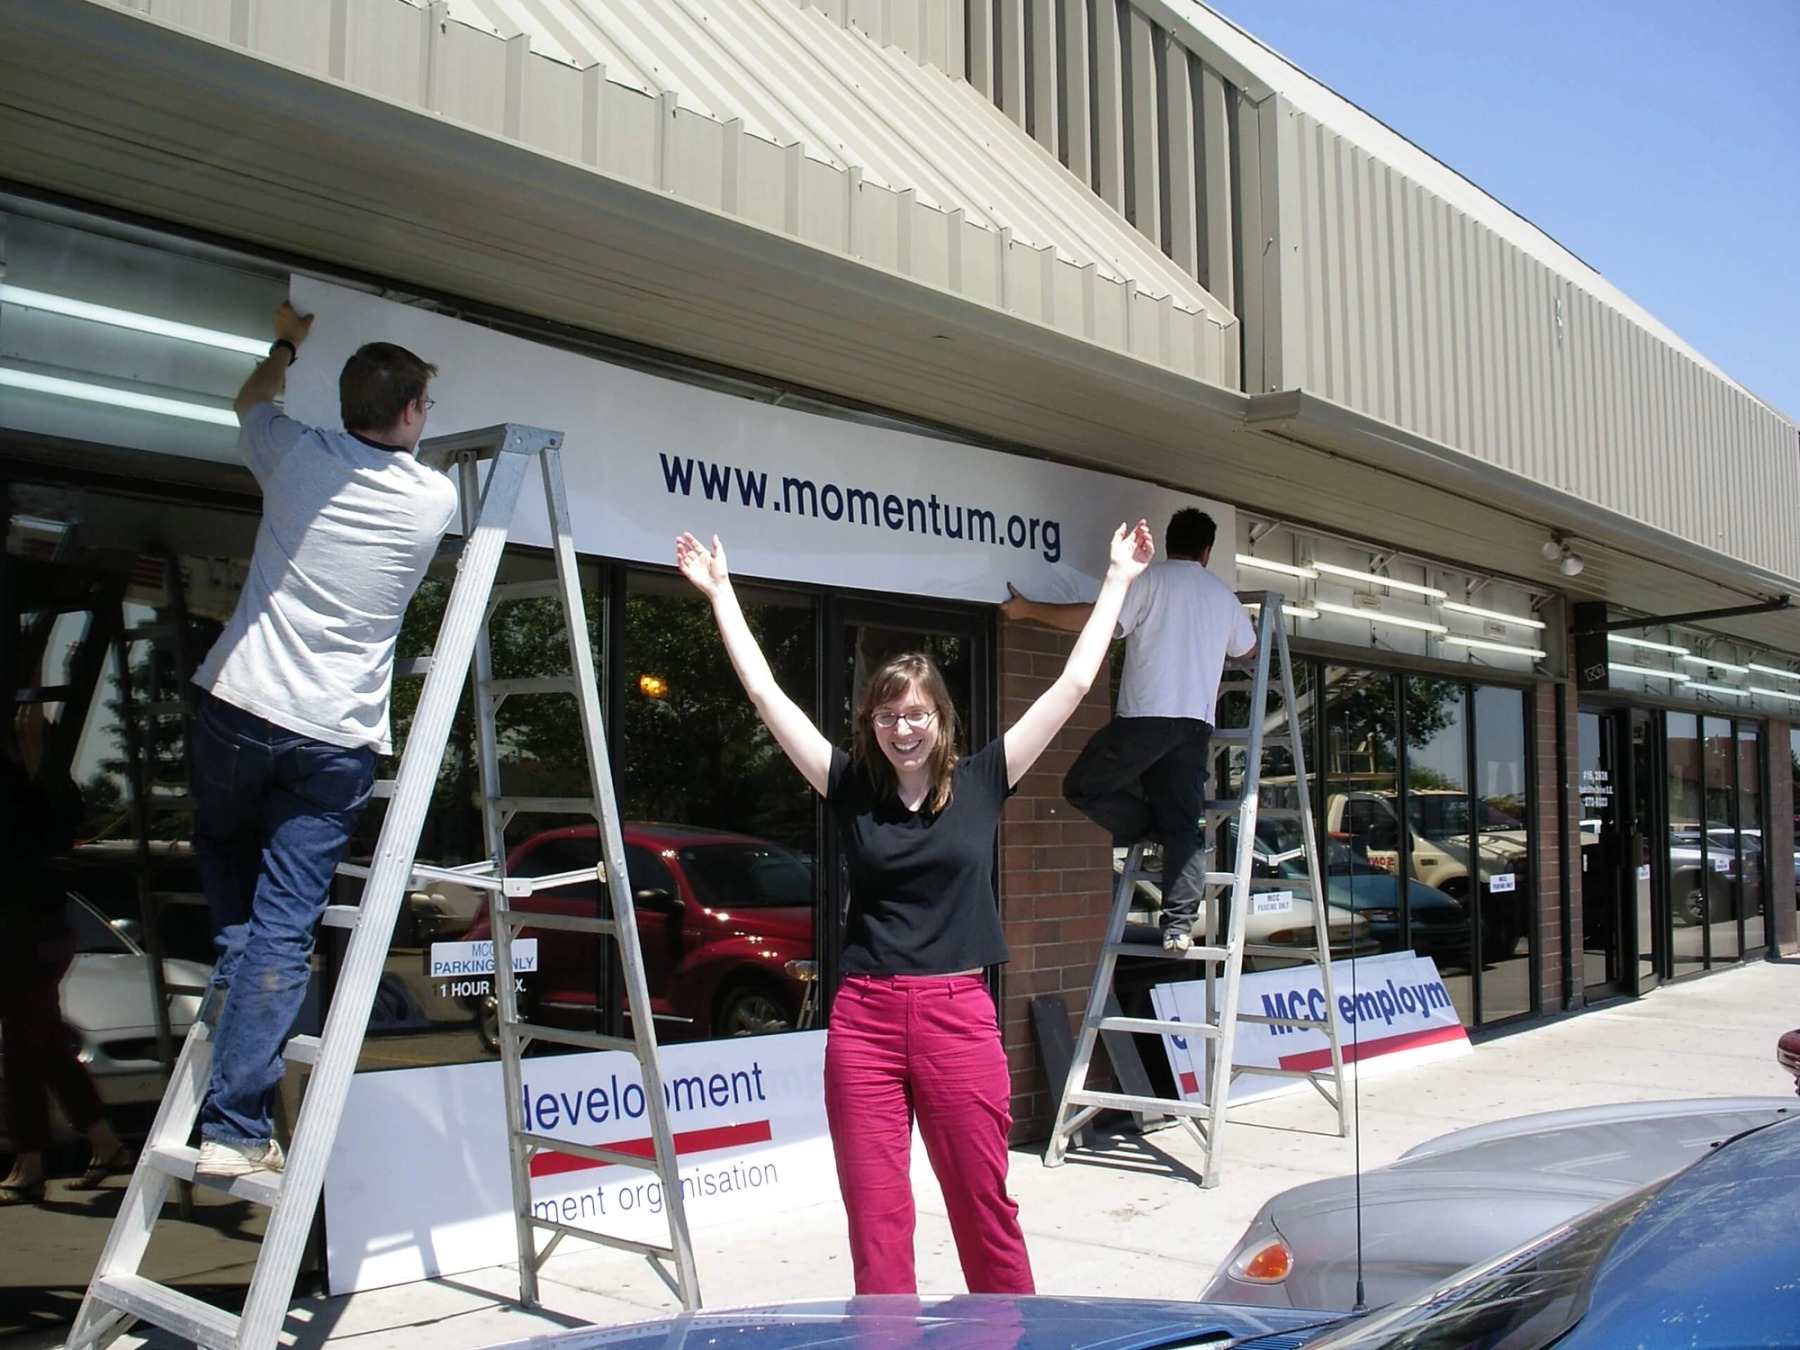 A woman in a black shirt and pink pants smiles and waves as two signage workers hang a sign reading "www.momentum.org" on the building behind her.